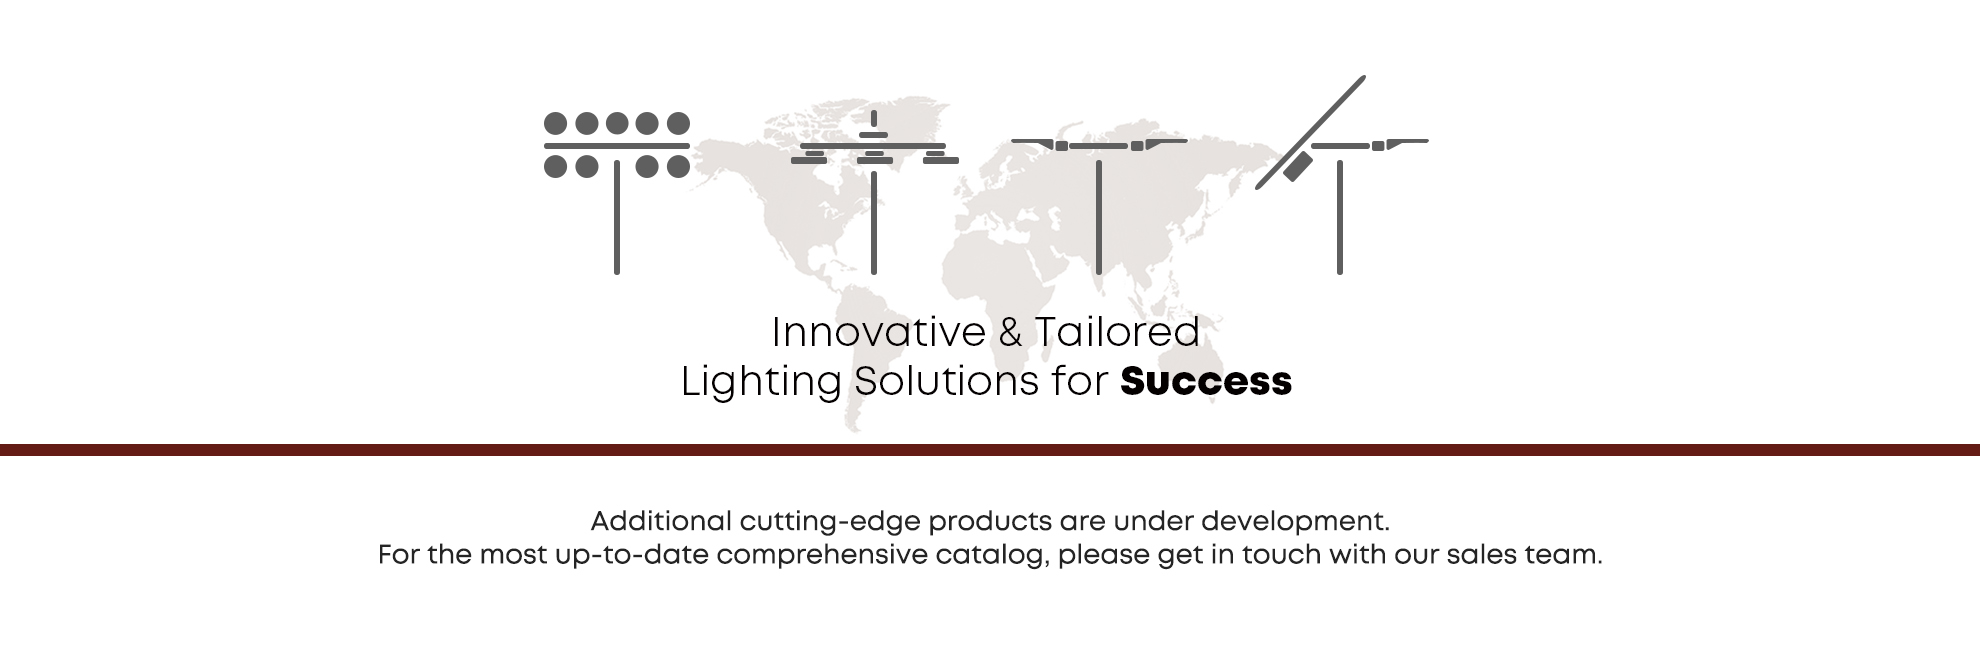 Innovative & Tailored Lighting Solutions for Success